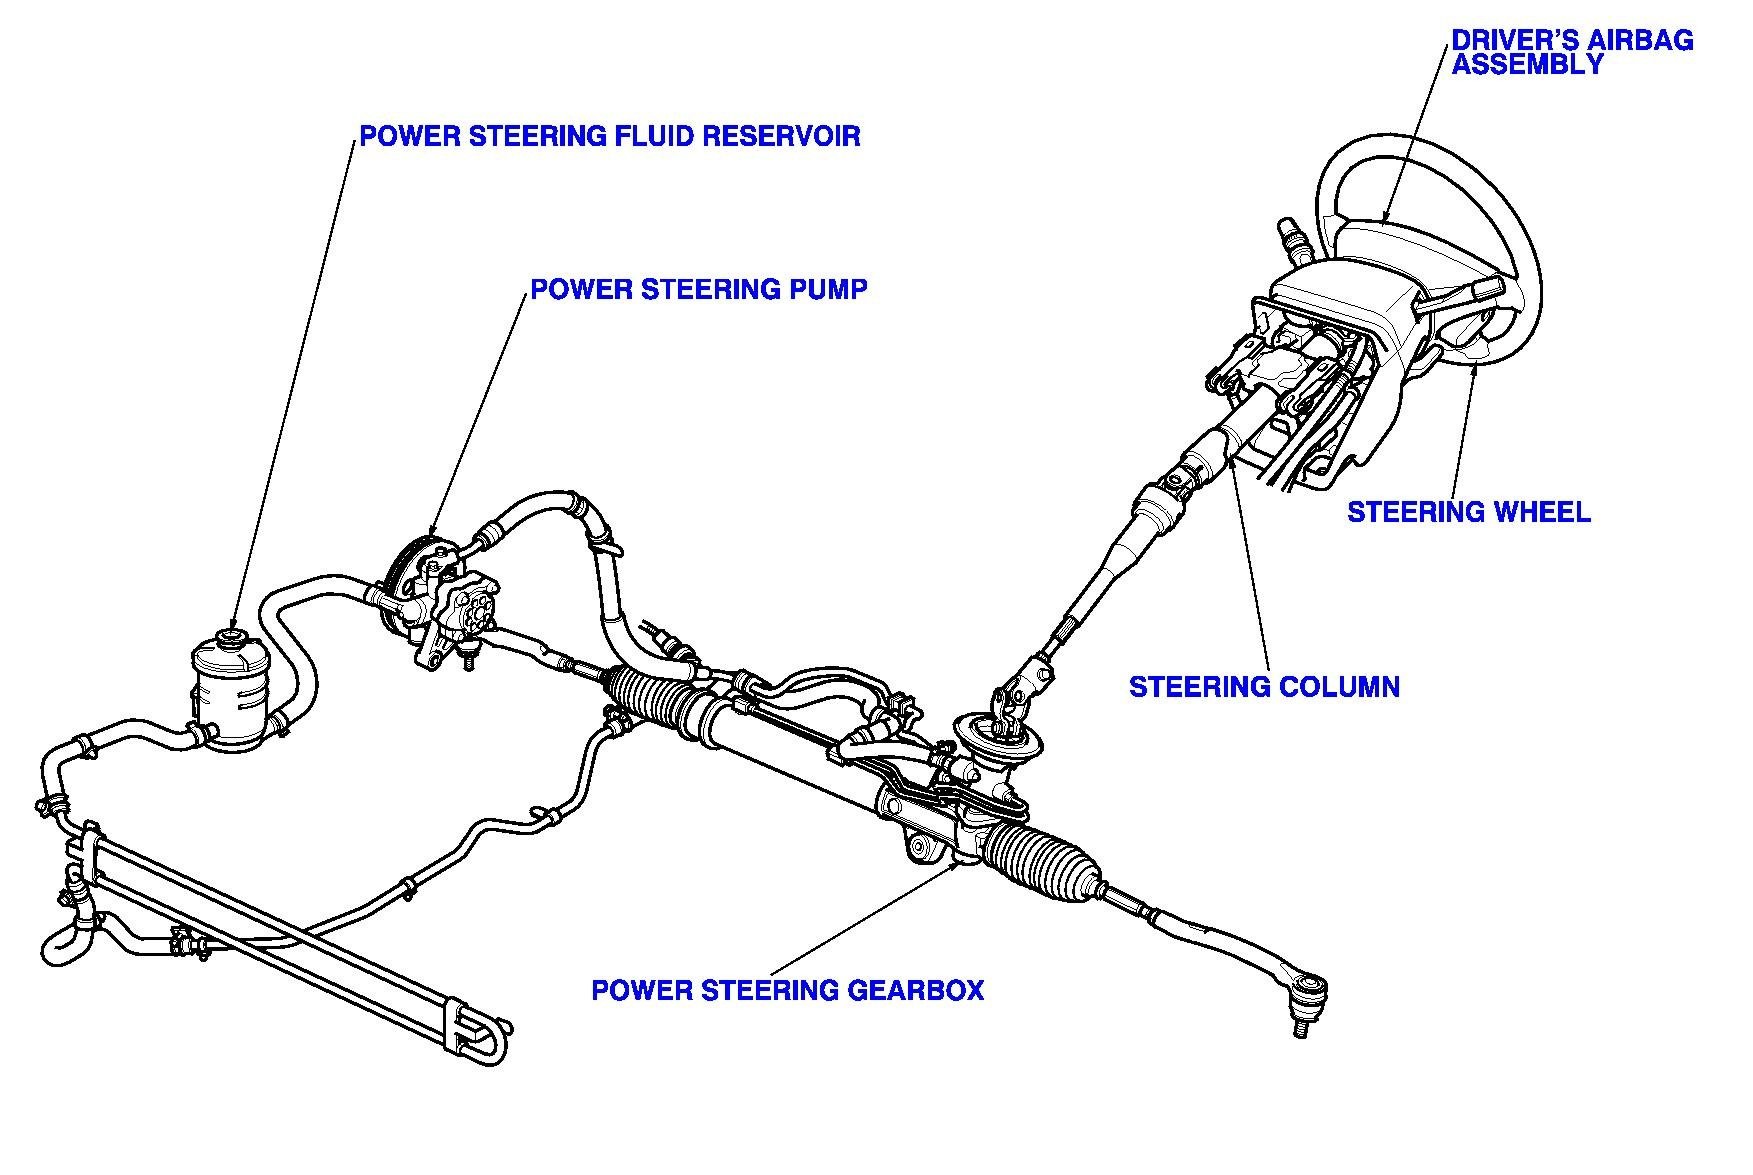 Power Steering Components Diagram where Can I Find A Picture Of the Power Steering Hose On the Acura Mdx Of Power Steering Components Diagram